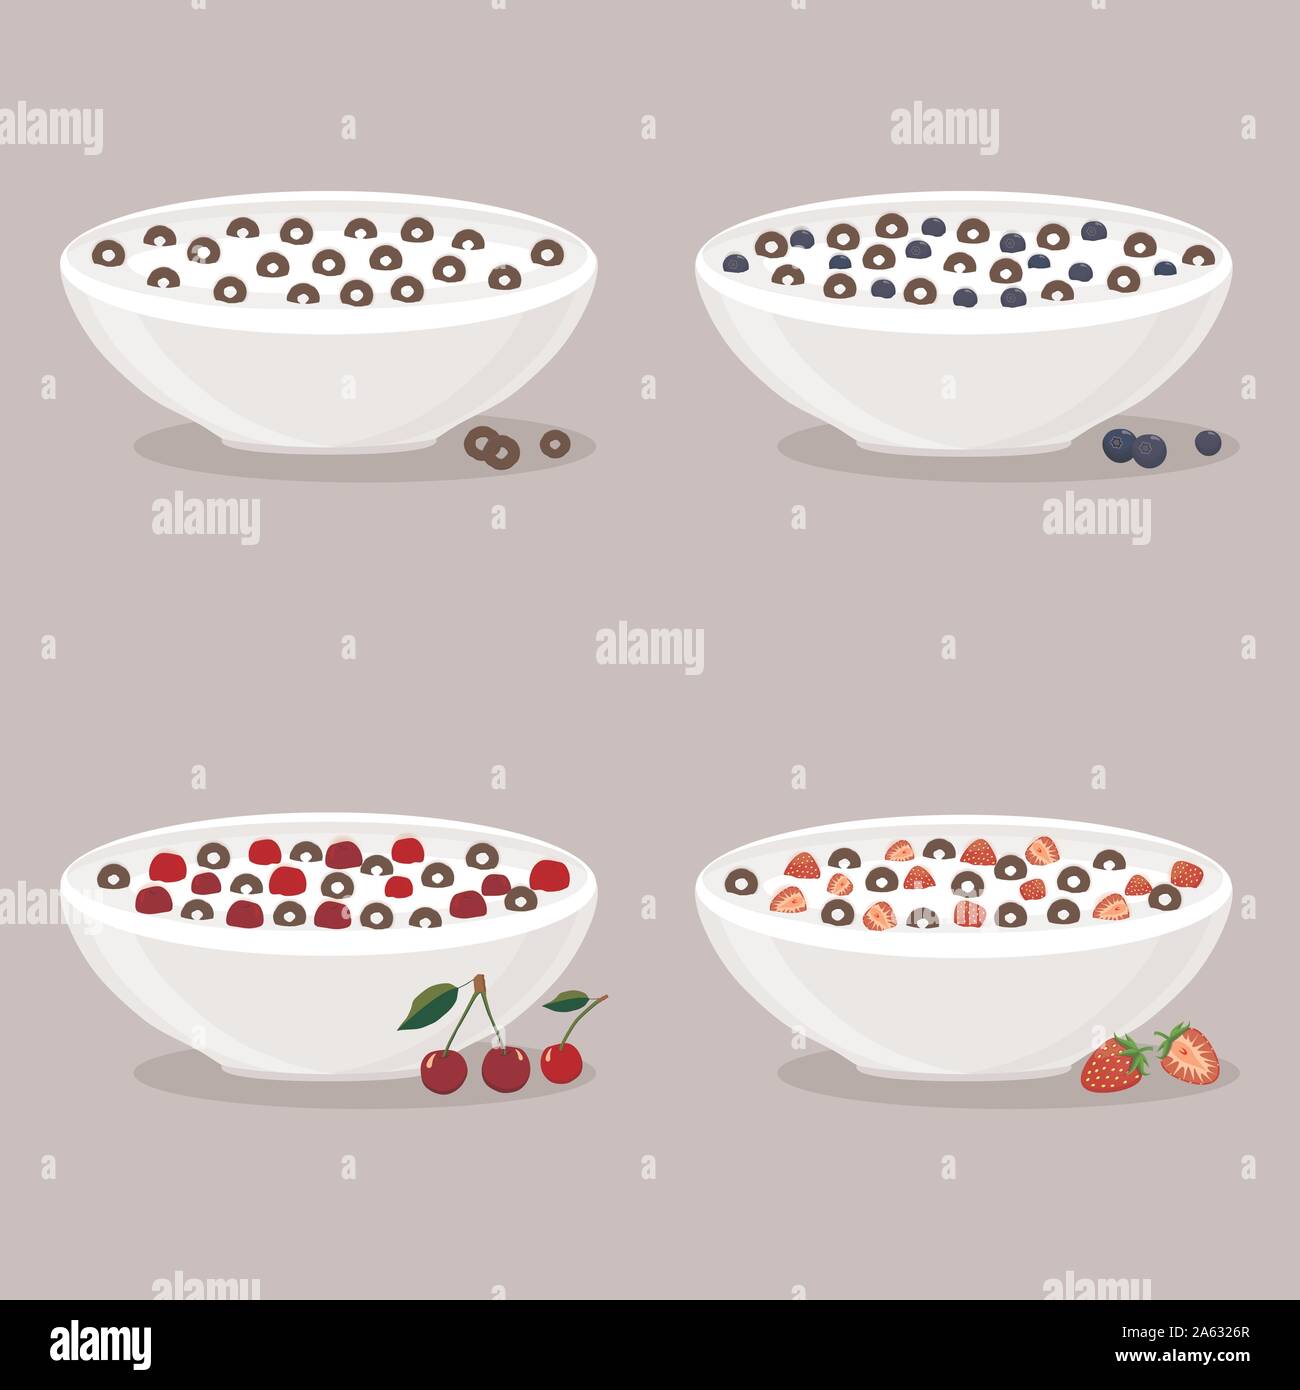 Abstract vector icon illustration logo for white milk cereal in bowl, chocolate flakes balls. Cereal pattern consisting of bowls, plate is filled with Stock Vector